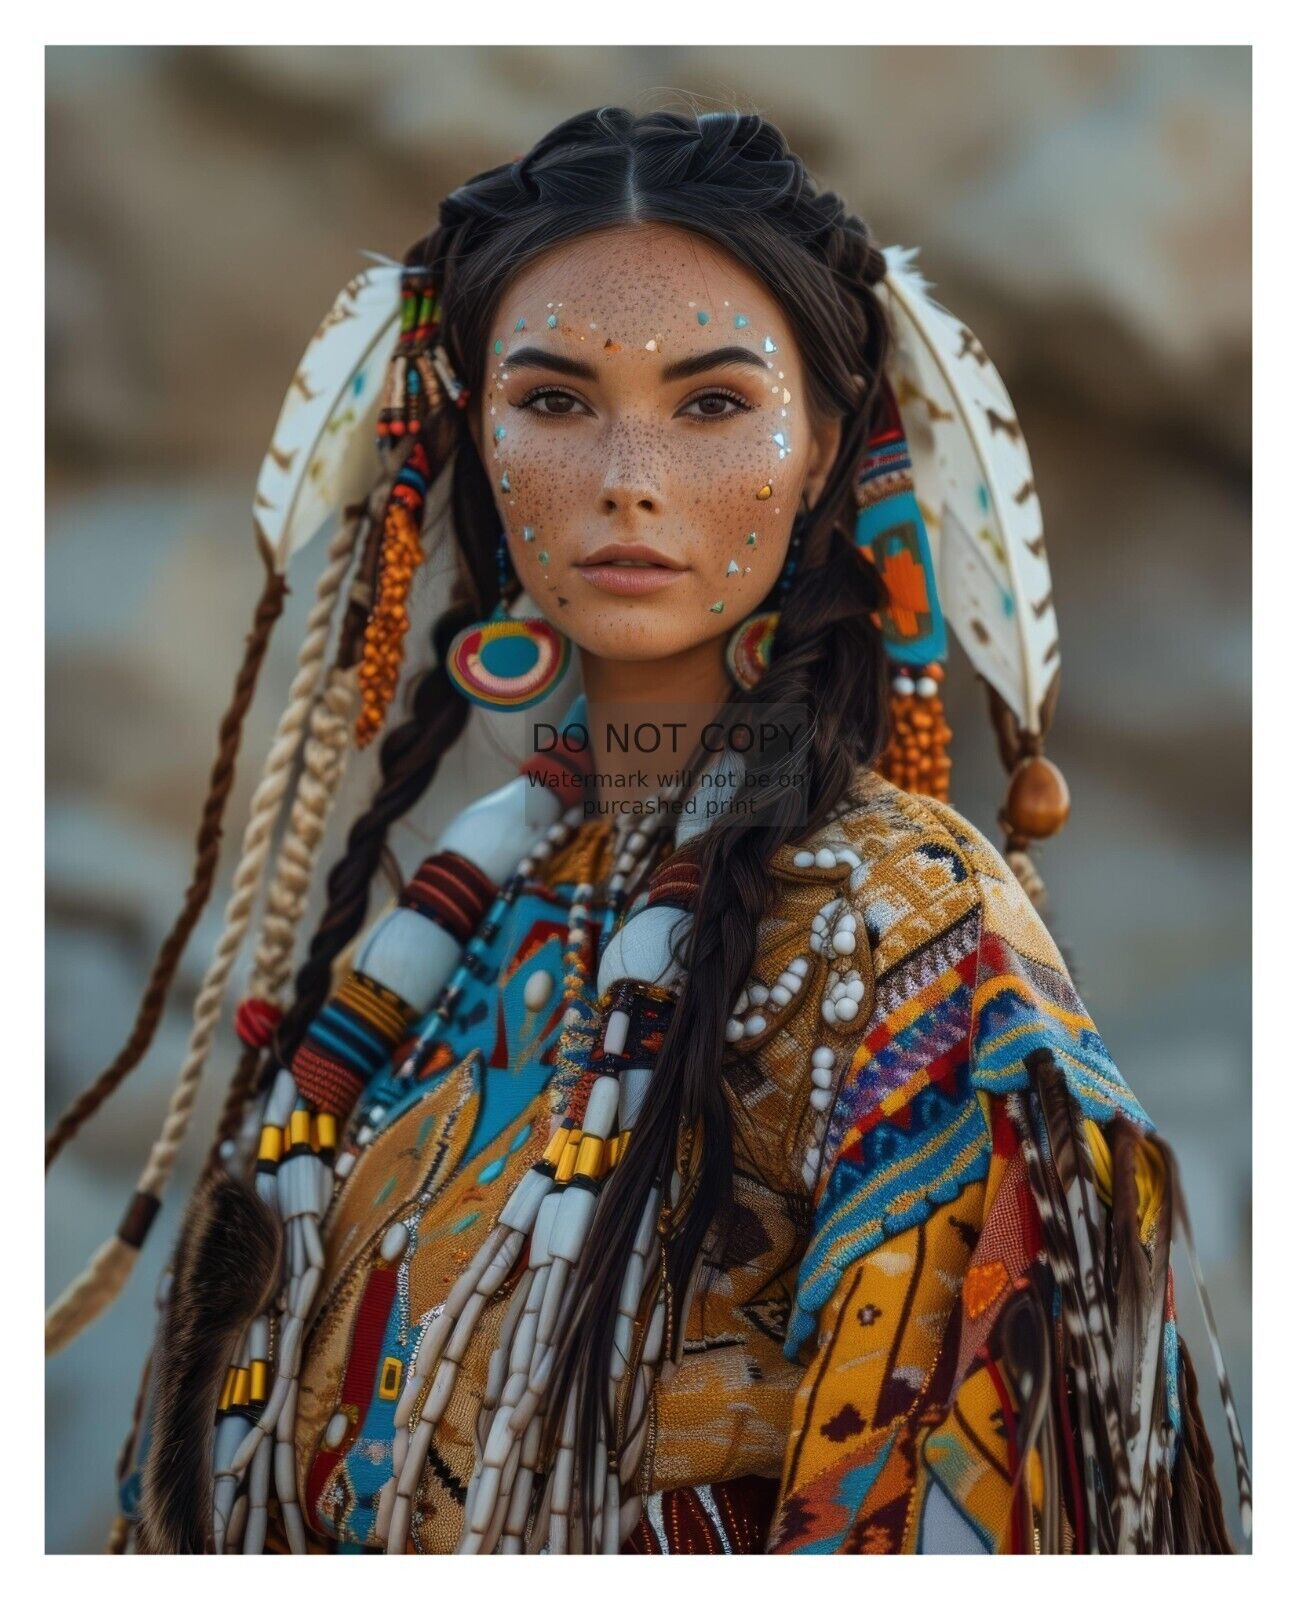 GORGEOUS YOUNG NATIVE AMERICAN WOMAN IN TRADITIONAL CLOTHING 8X10 FANTASY PHOTO